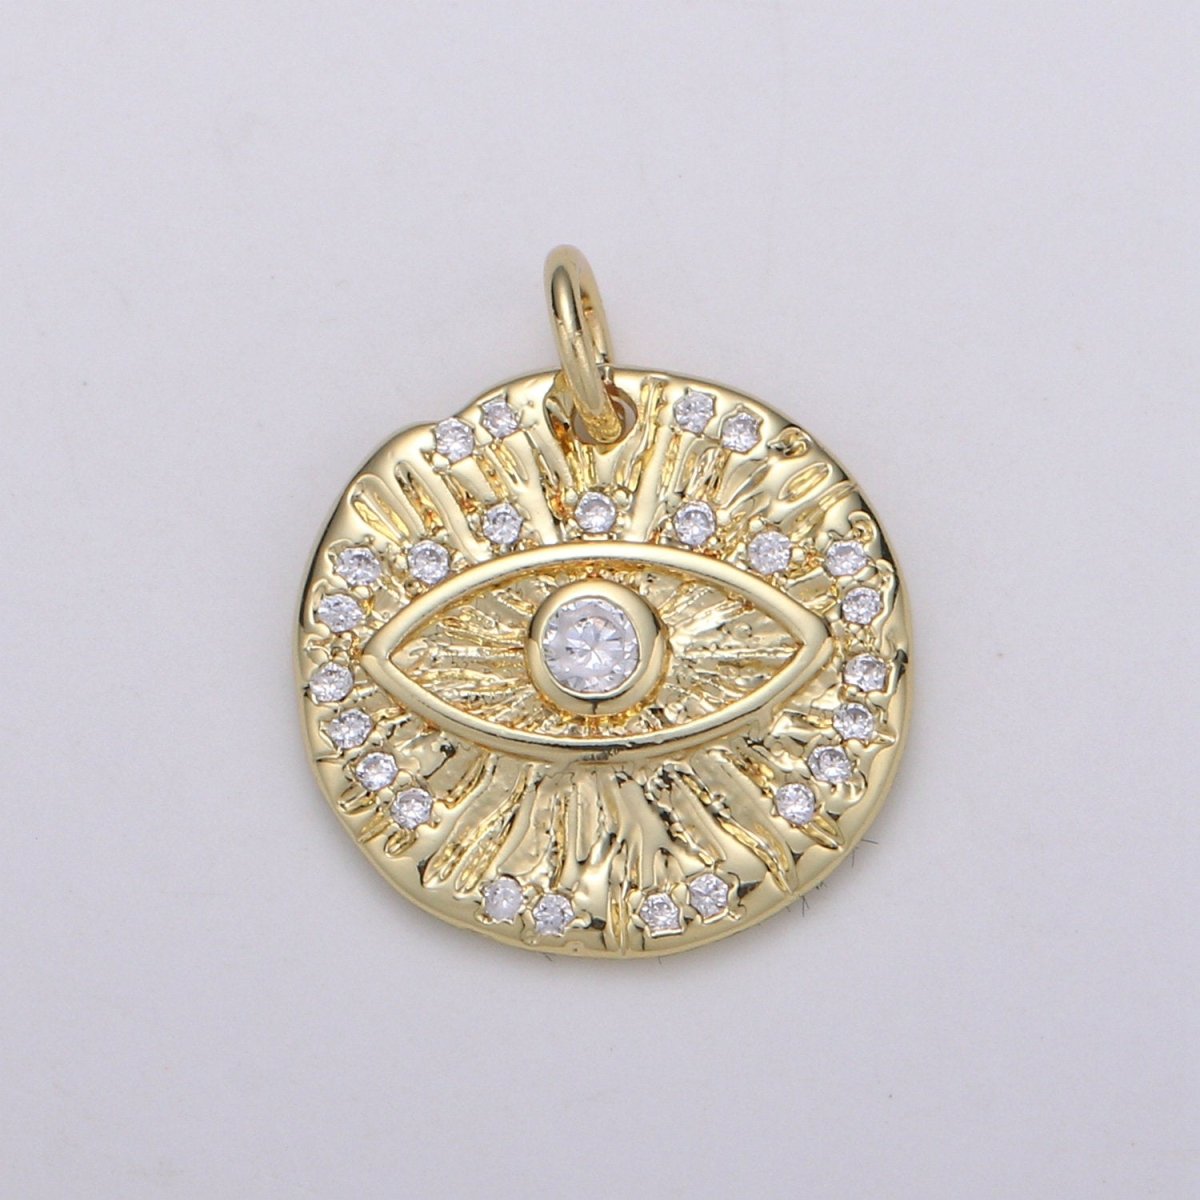 Micro Pave Evil eye Charm, Gold Medallion with Cubic Pendant, Dainty Evil Eye Charm, Bohemian Jewelry Amulet Protection Necklace Supply C-820 - DLUXCA